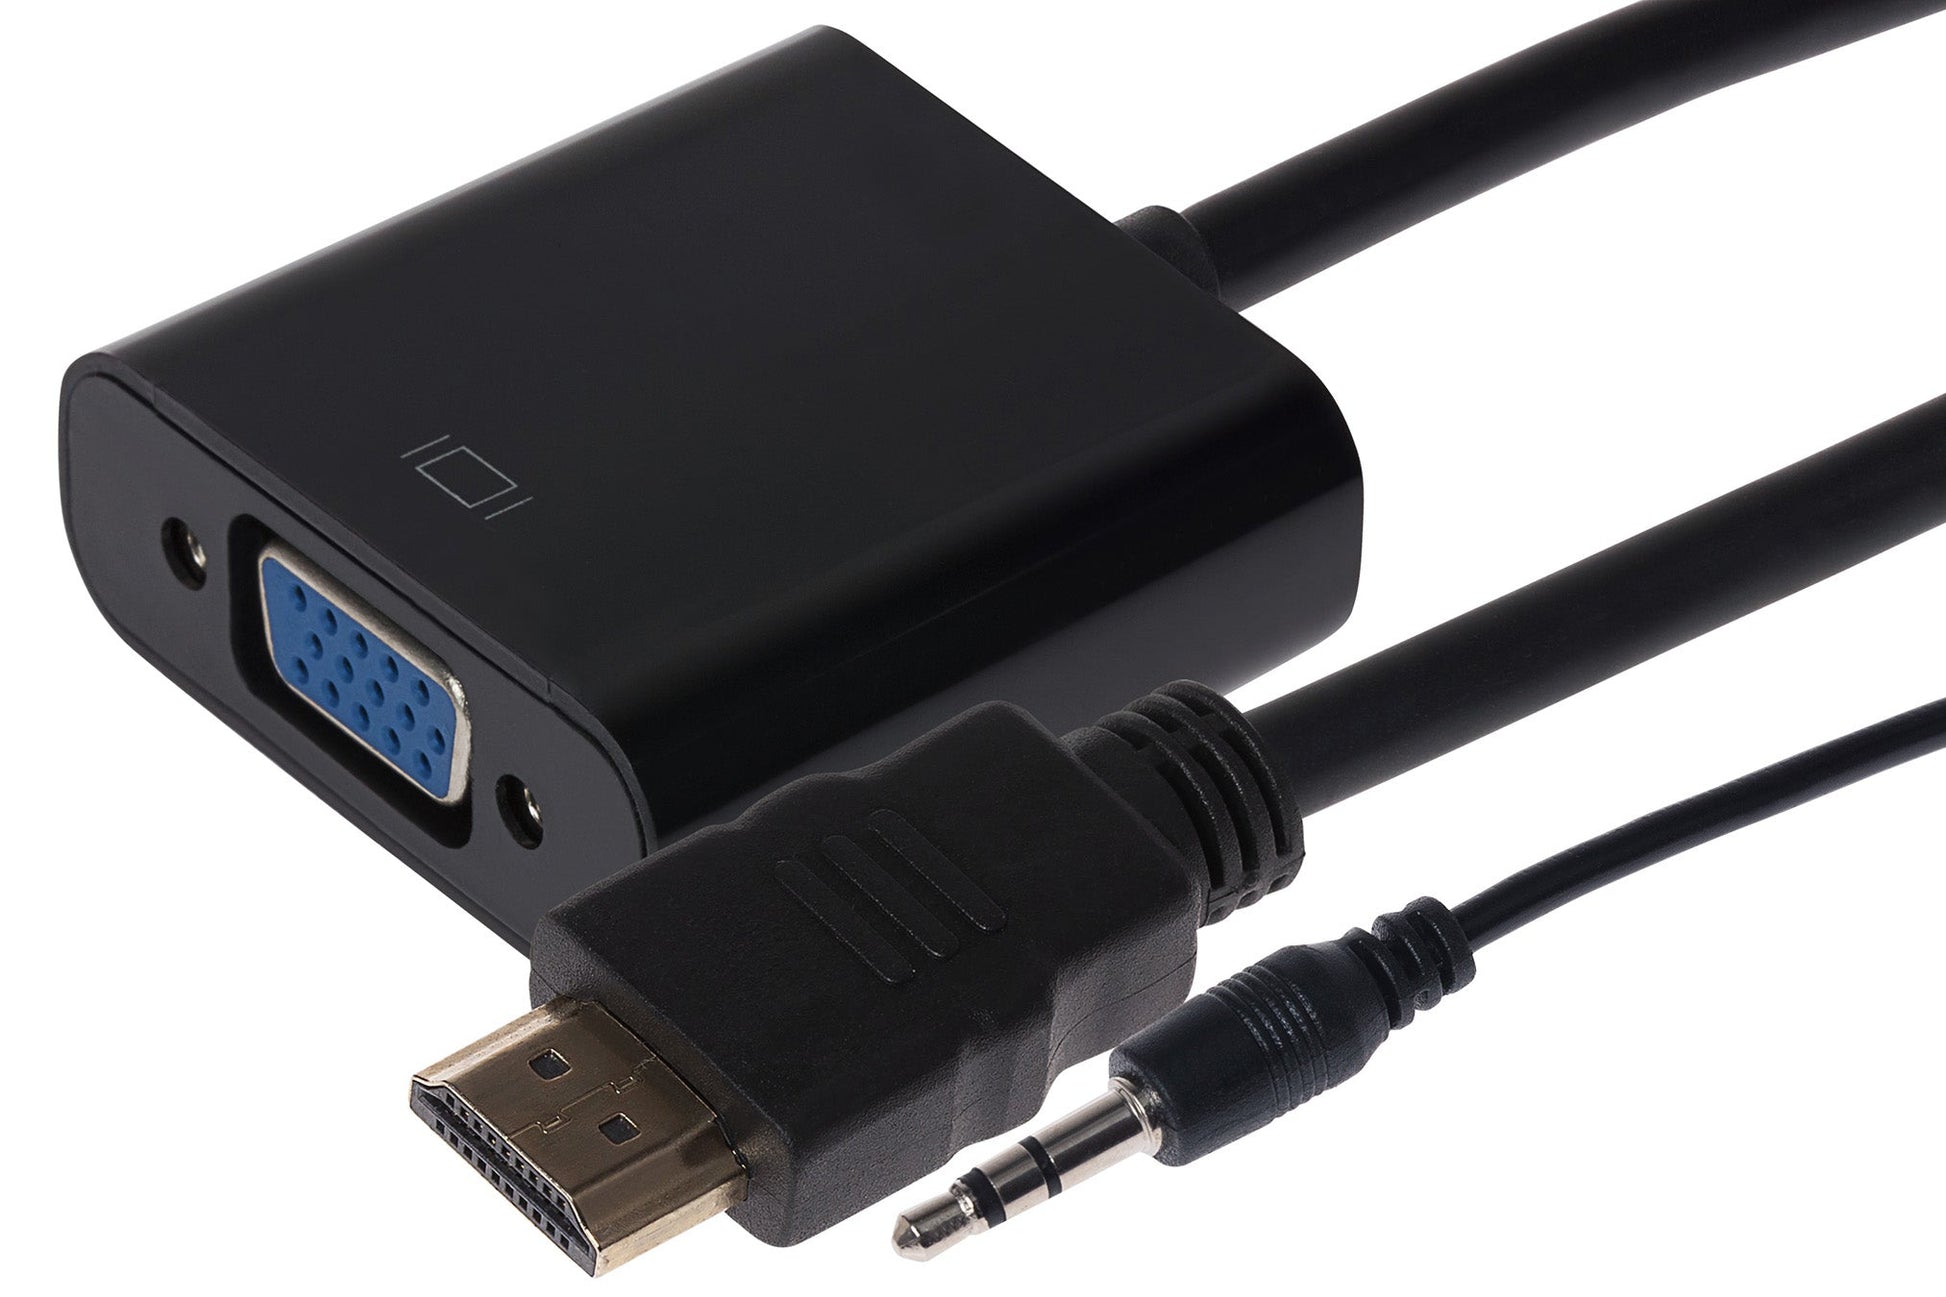 Nikkai HDMI to VGA / 3.5mm Jack Adapter - Black, Chargers & Adapters, Maplin